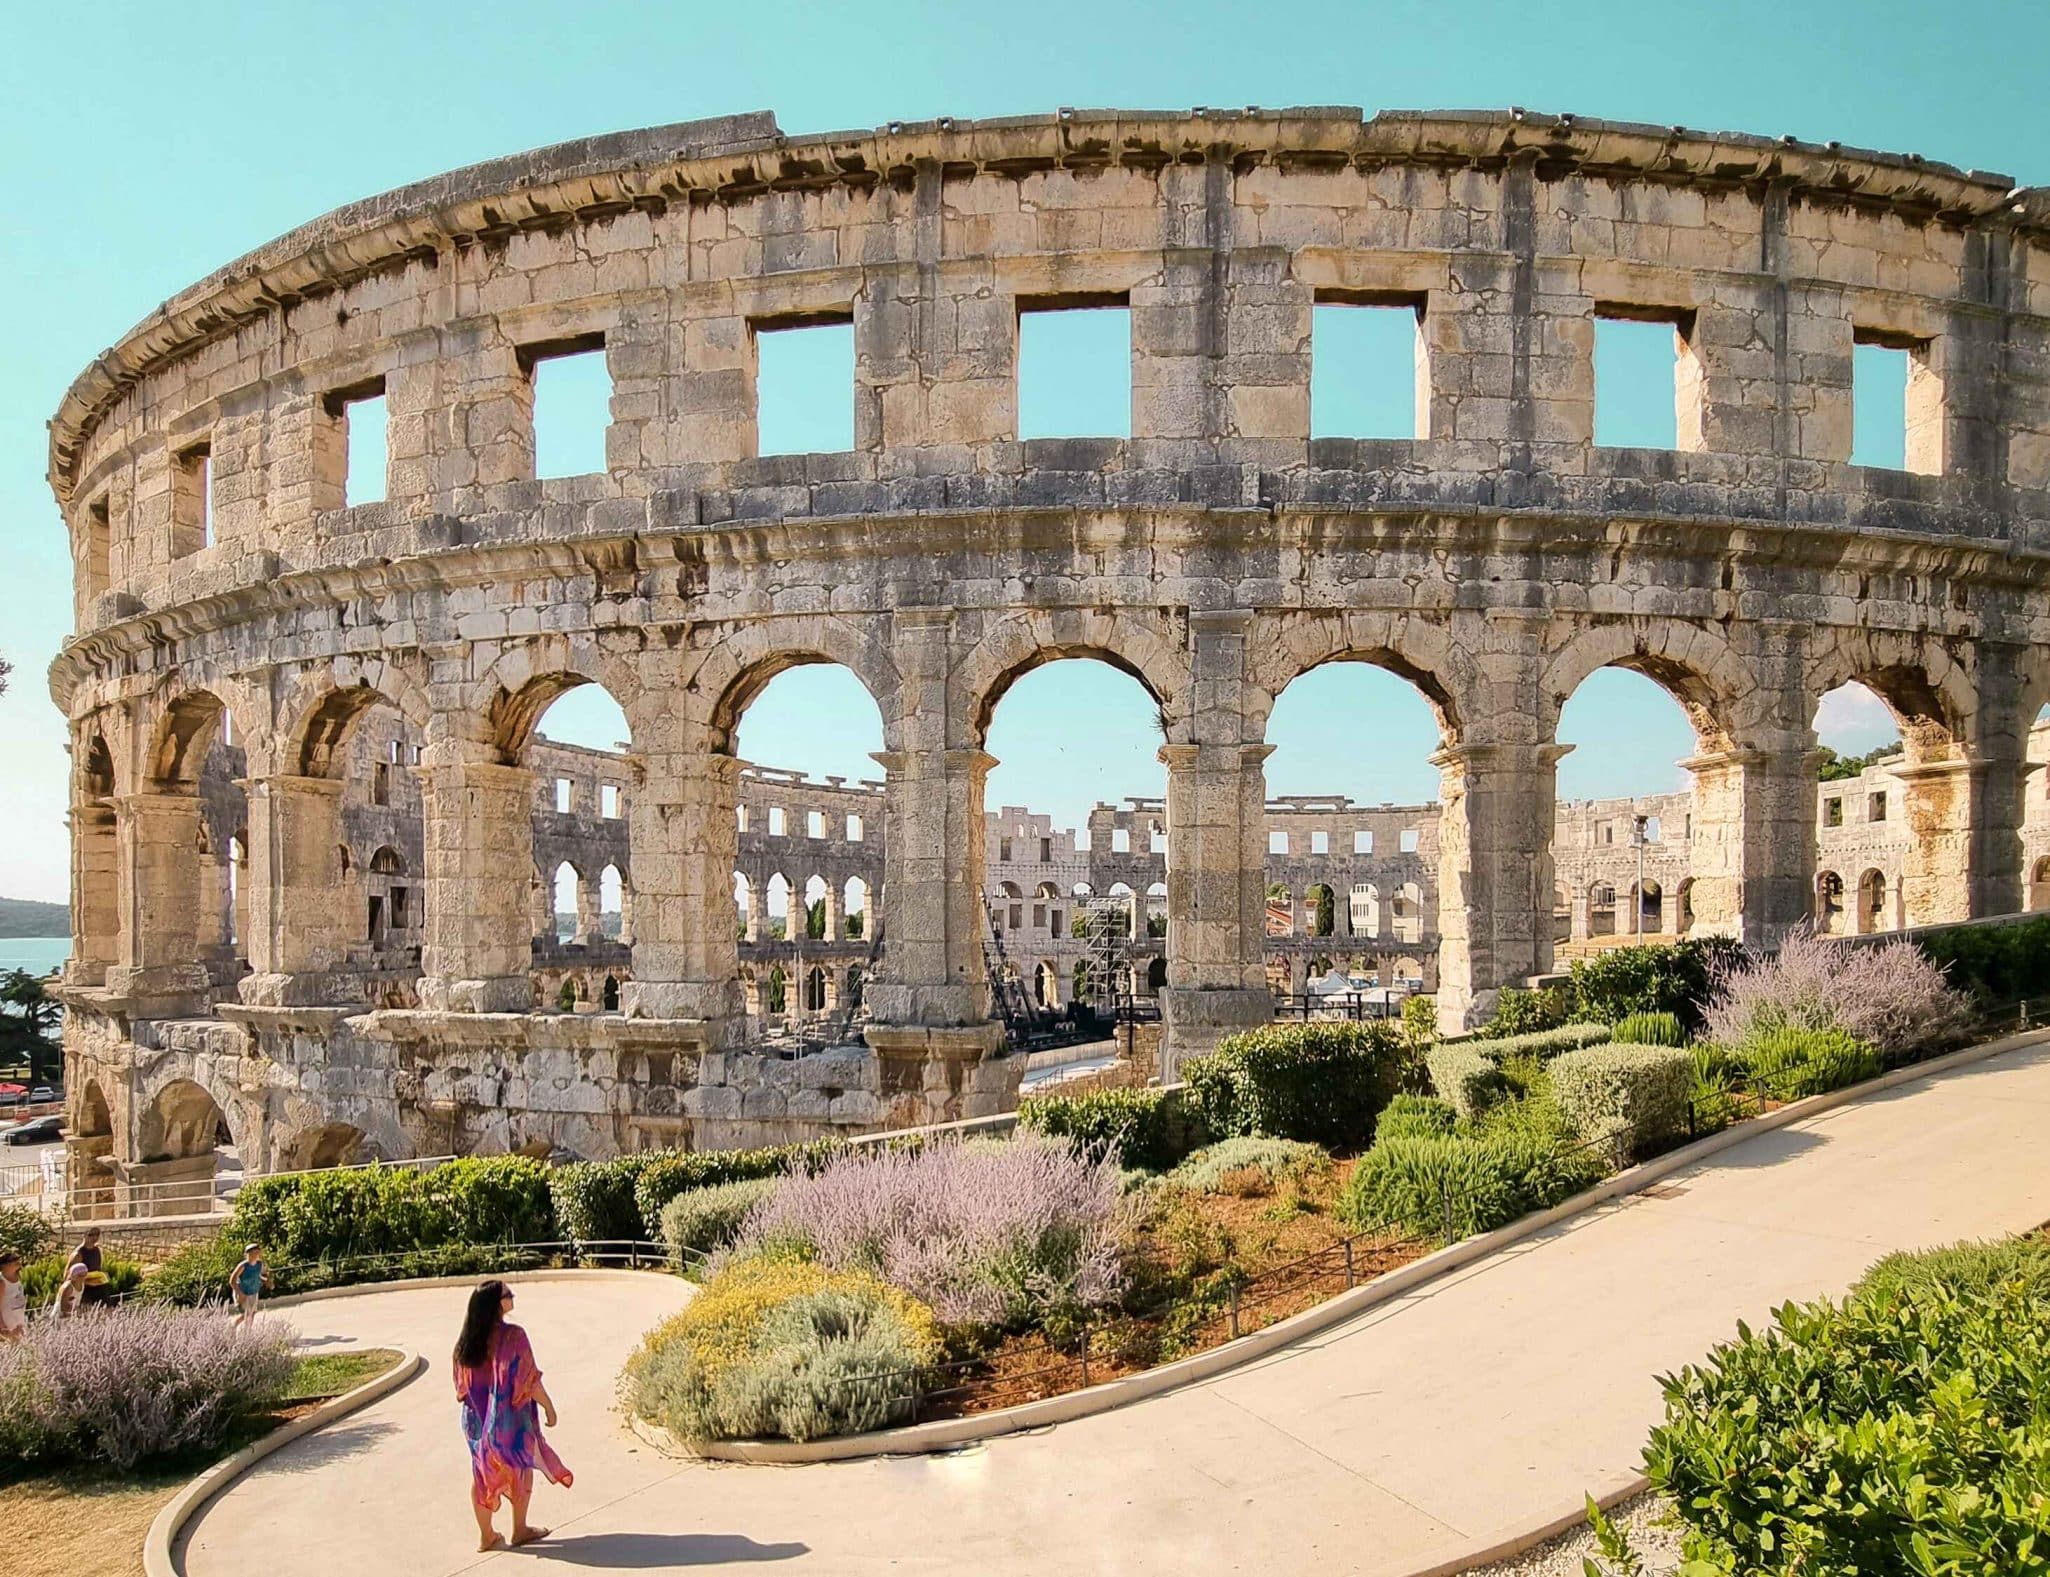 How to spend amazing 3 days in Pula